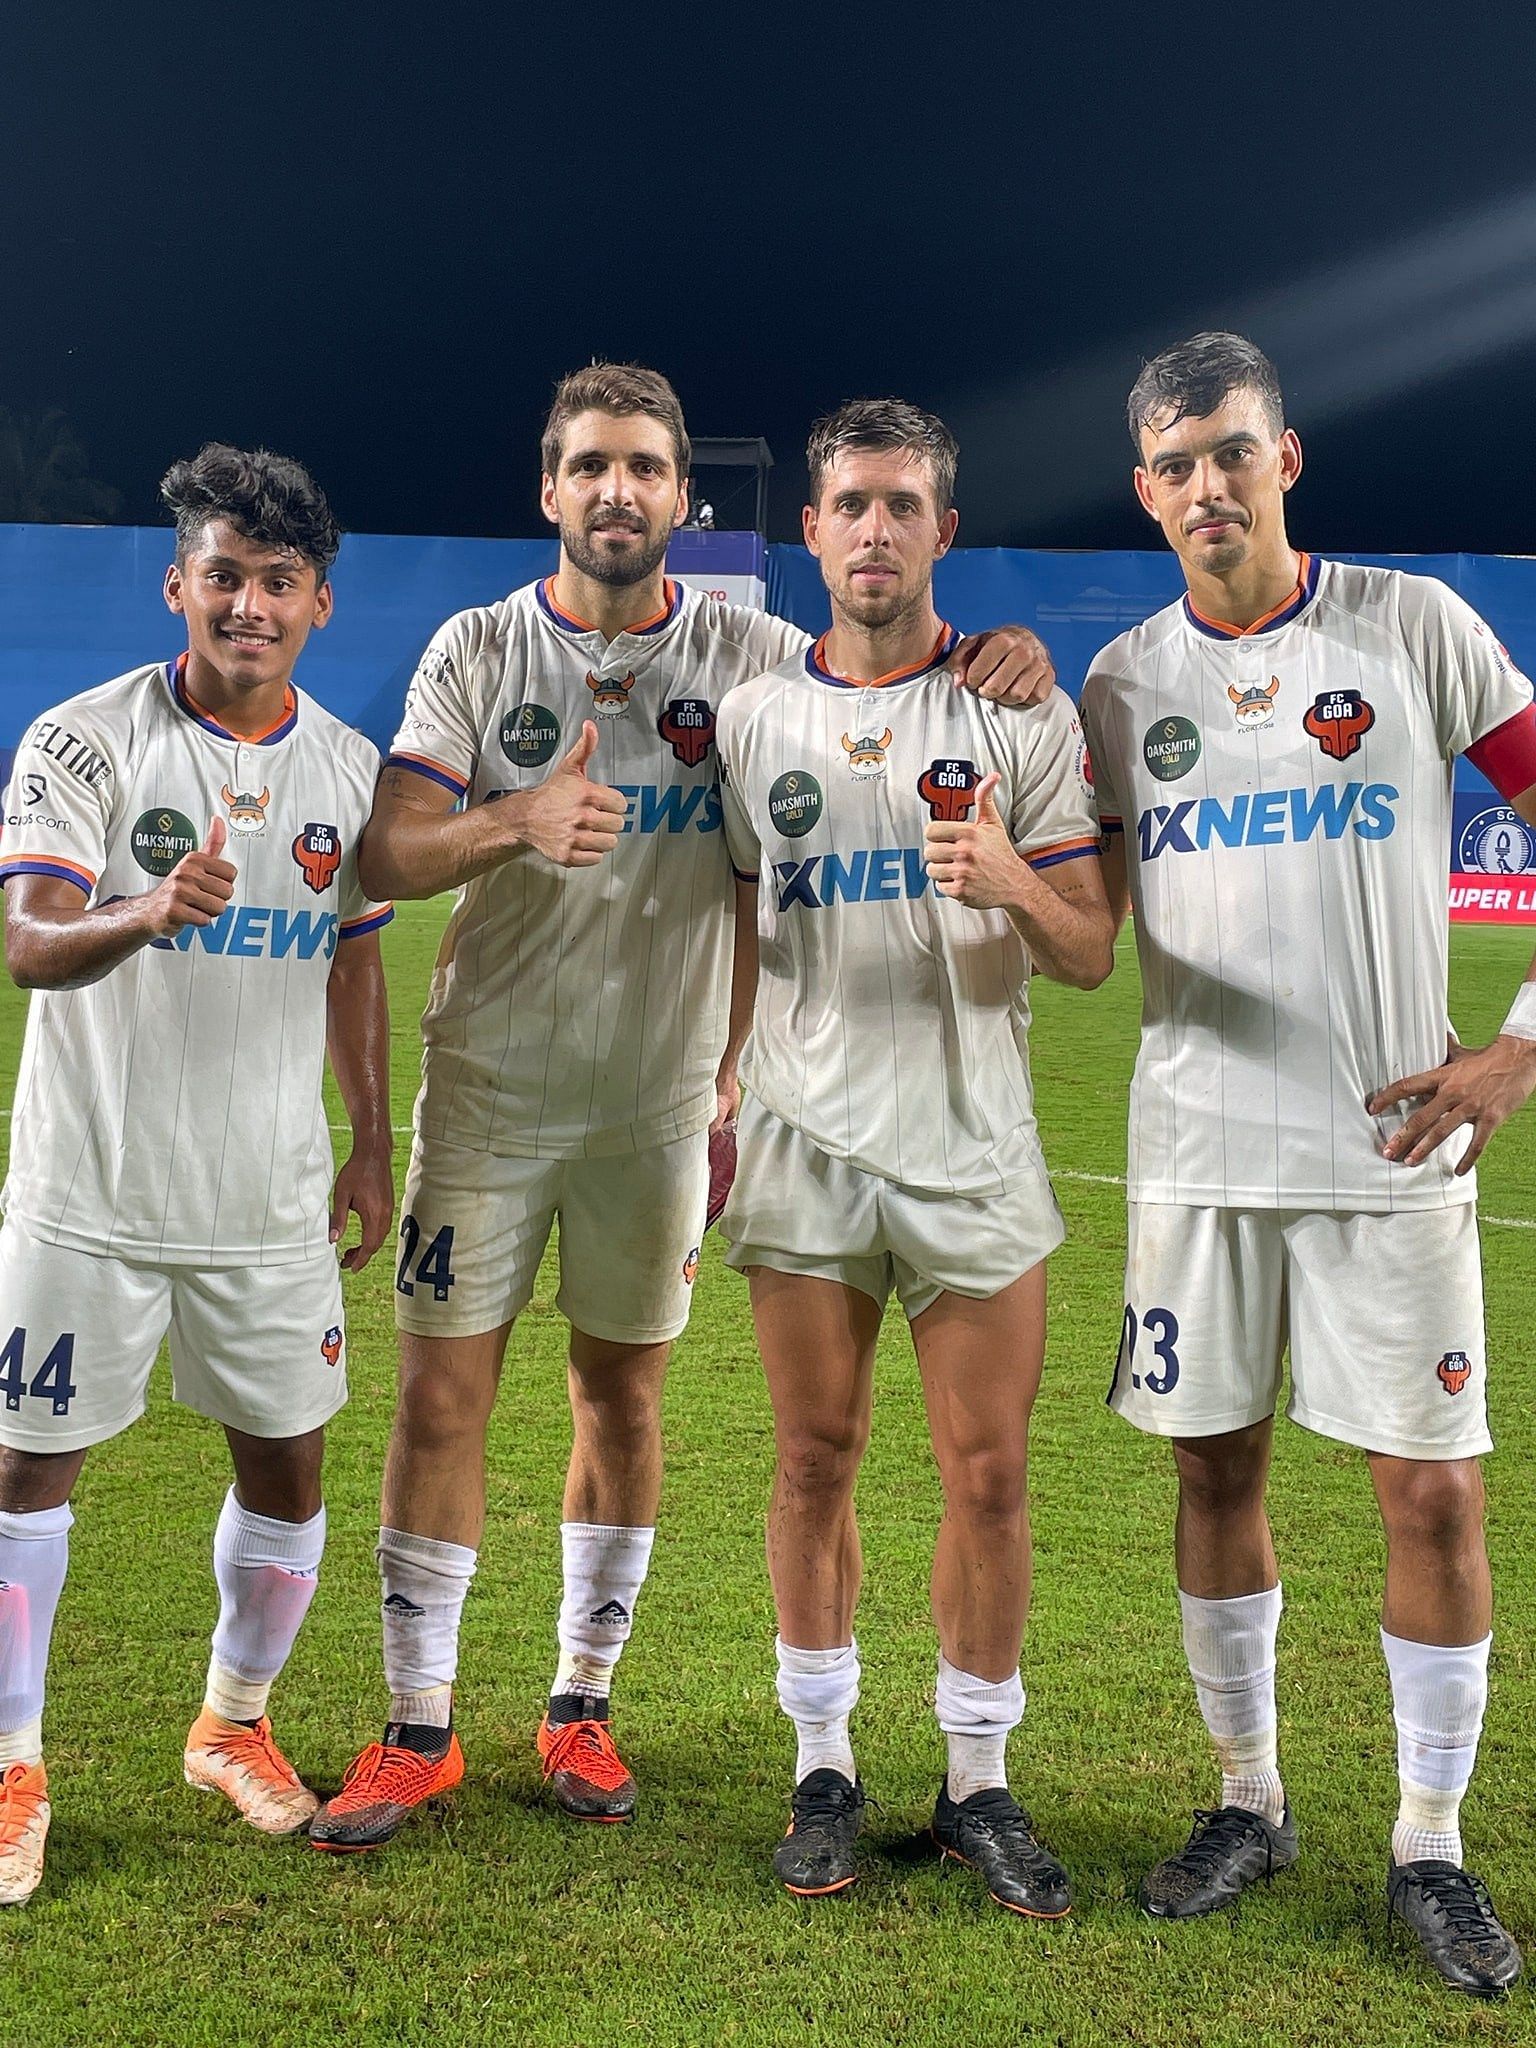 FC Goa secured their first victory of the season (Image courtesy: ISL Social media)